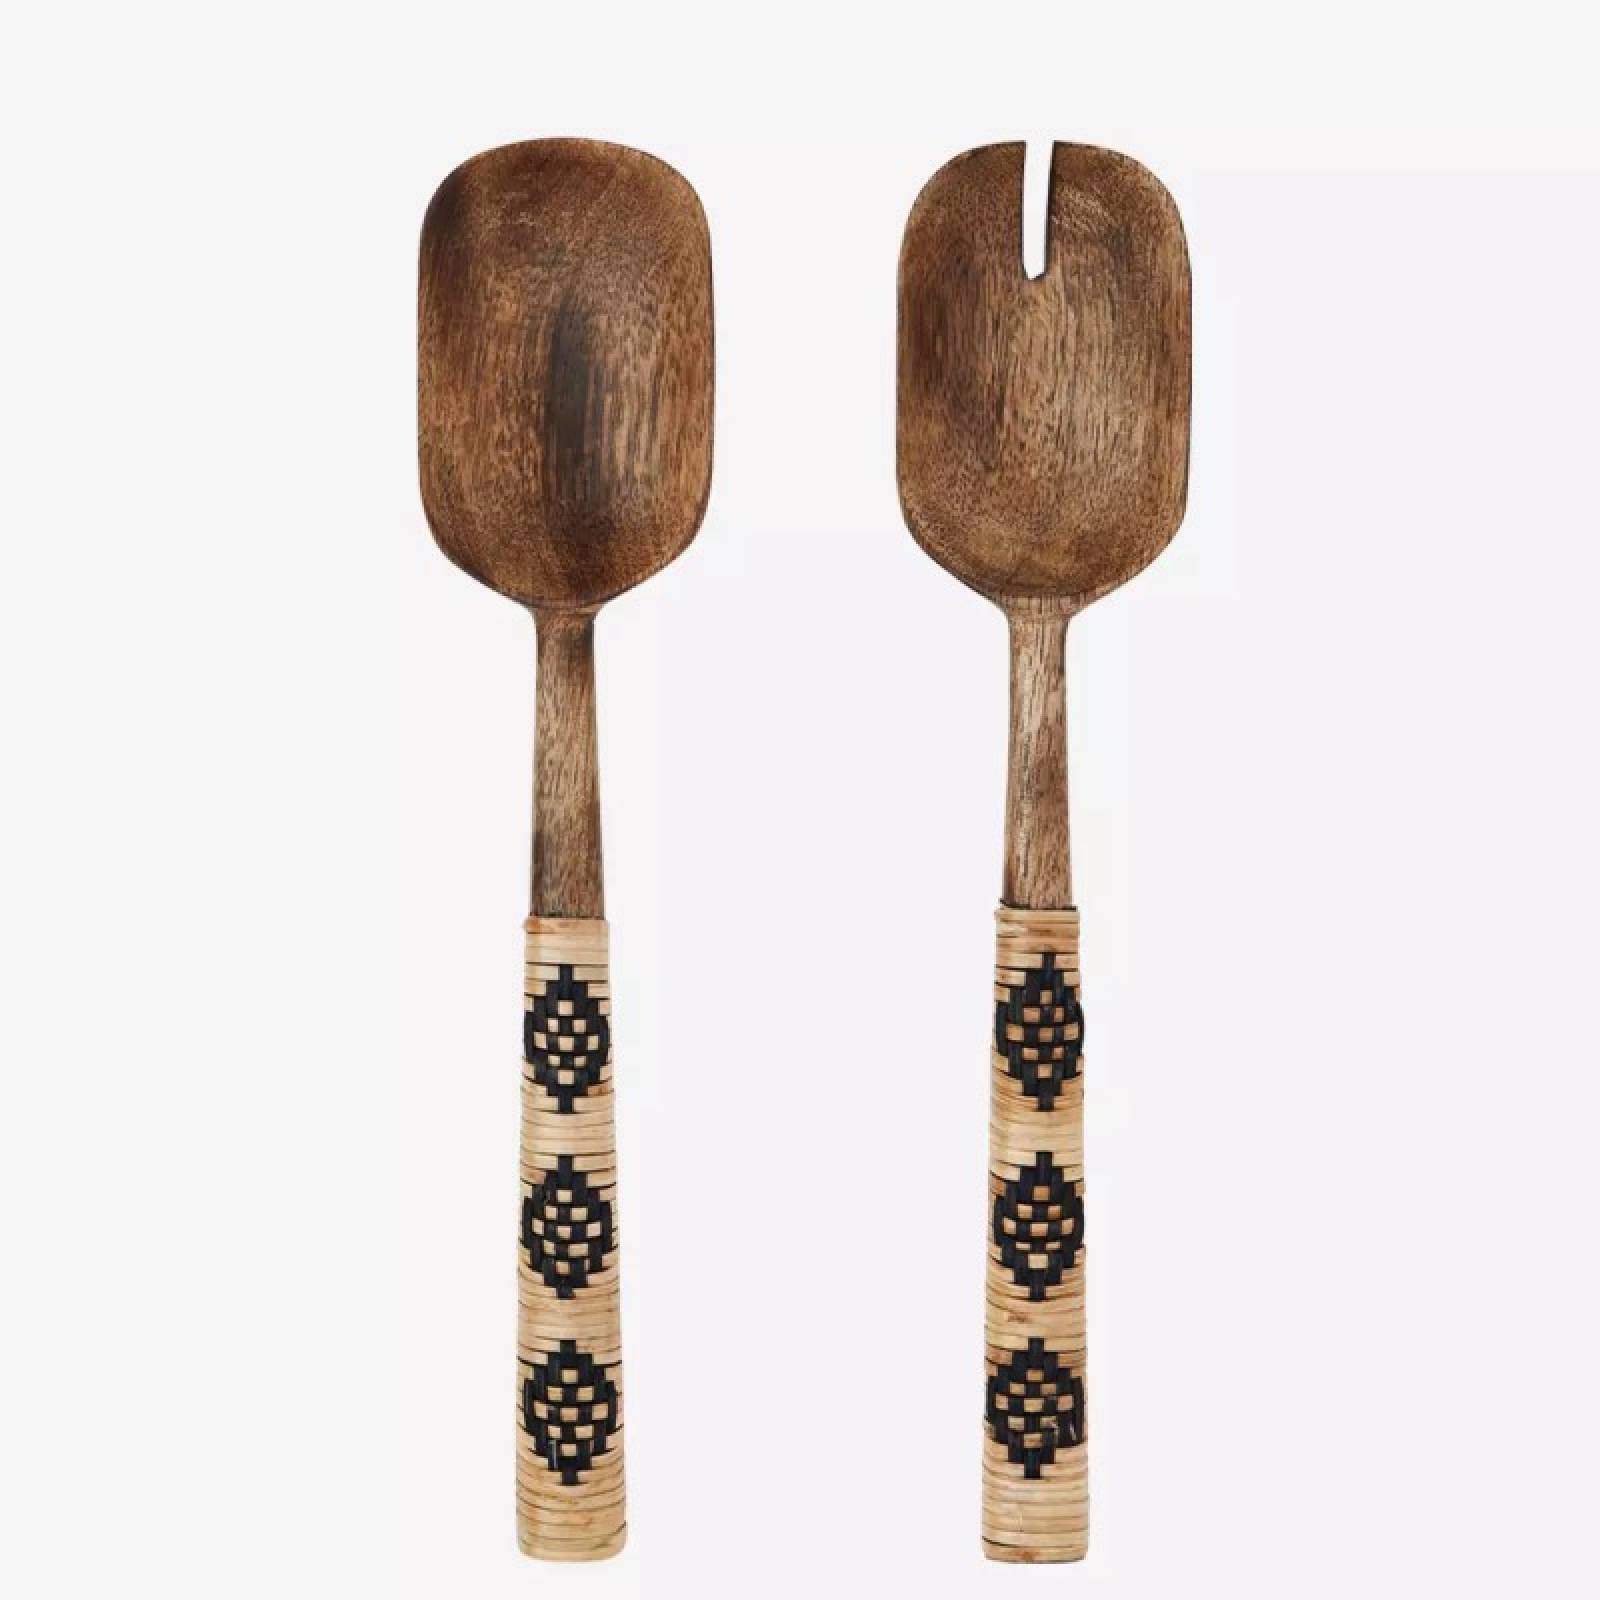 Pair Of Wooden Salad Servers With Bamboo Trim